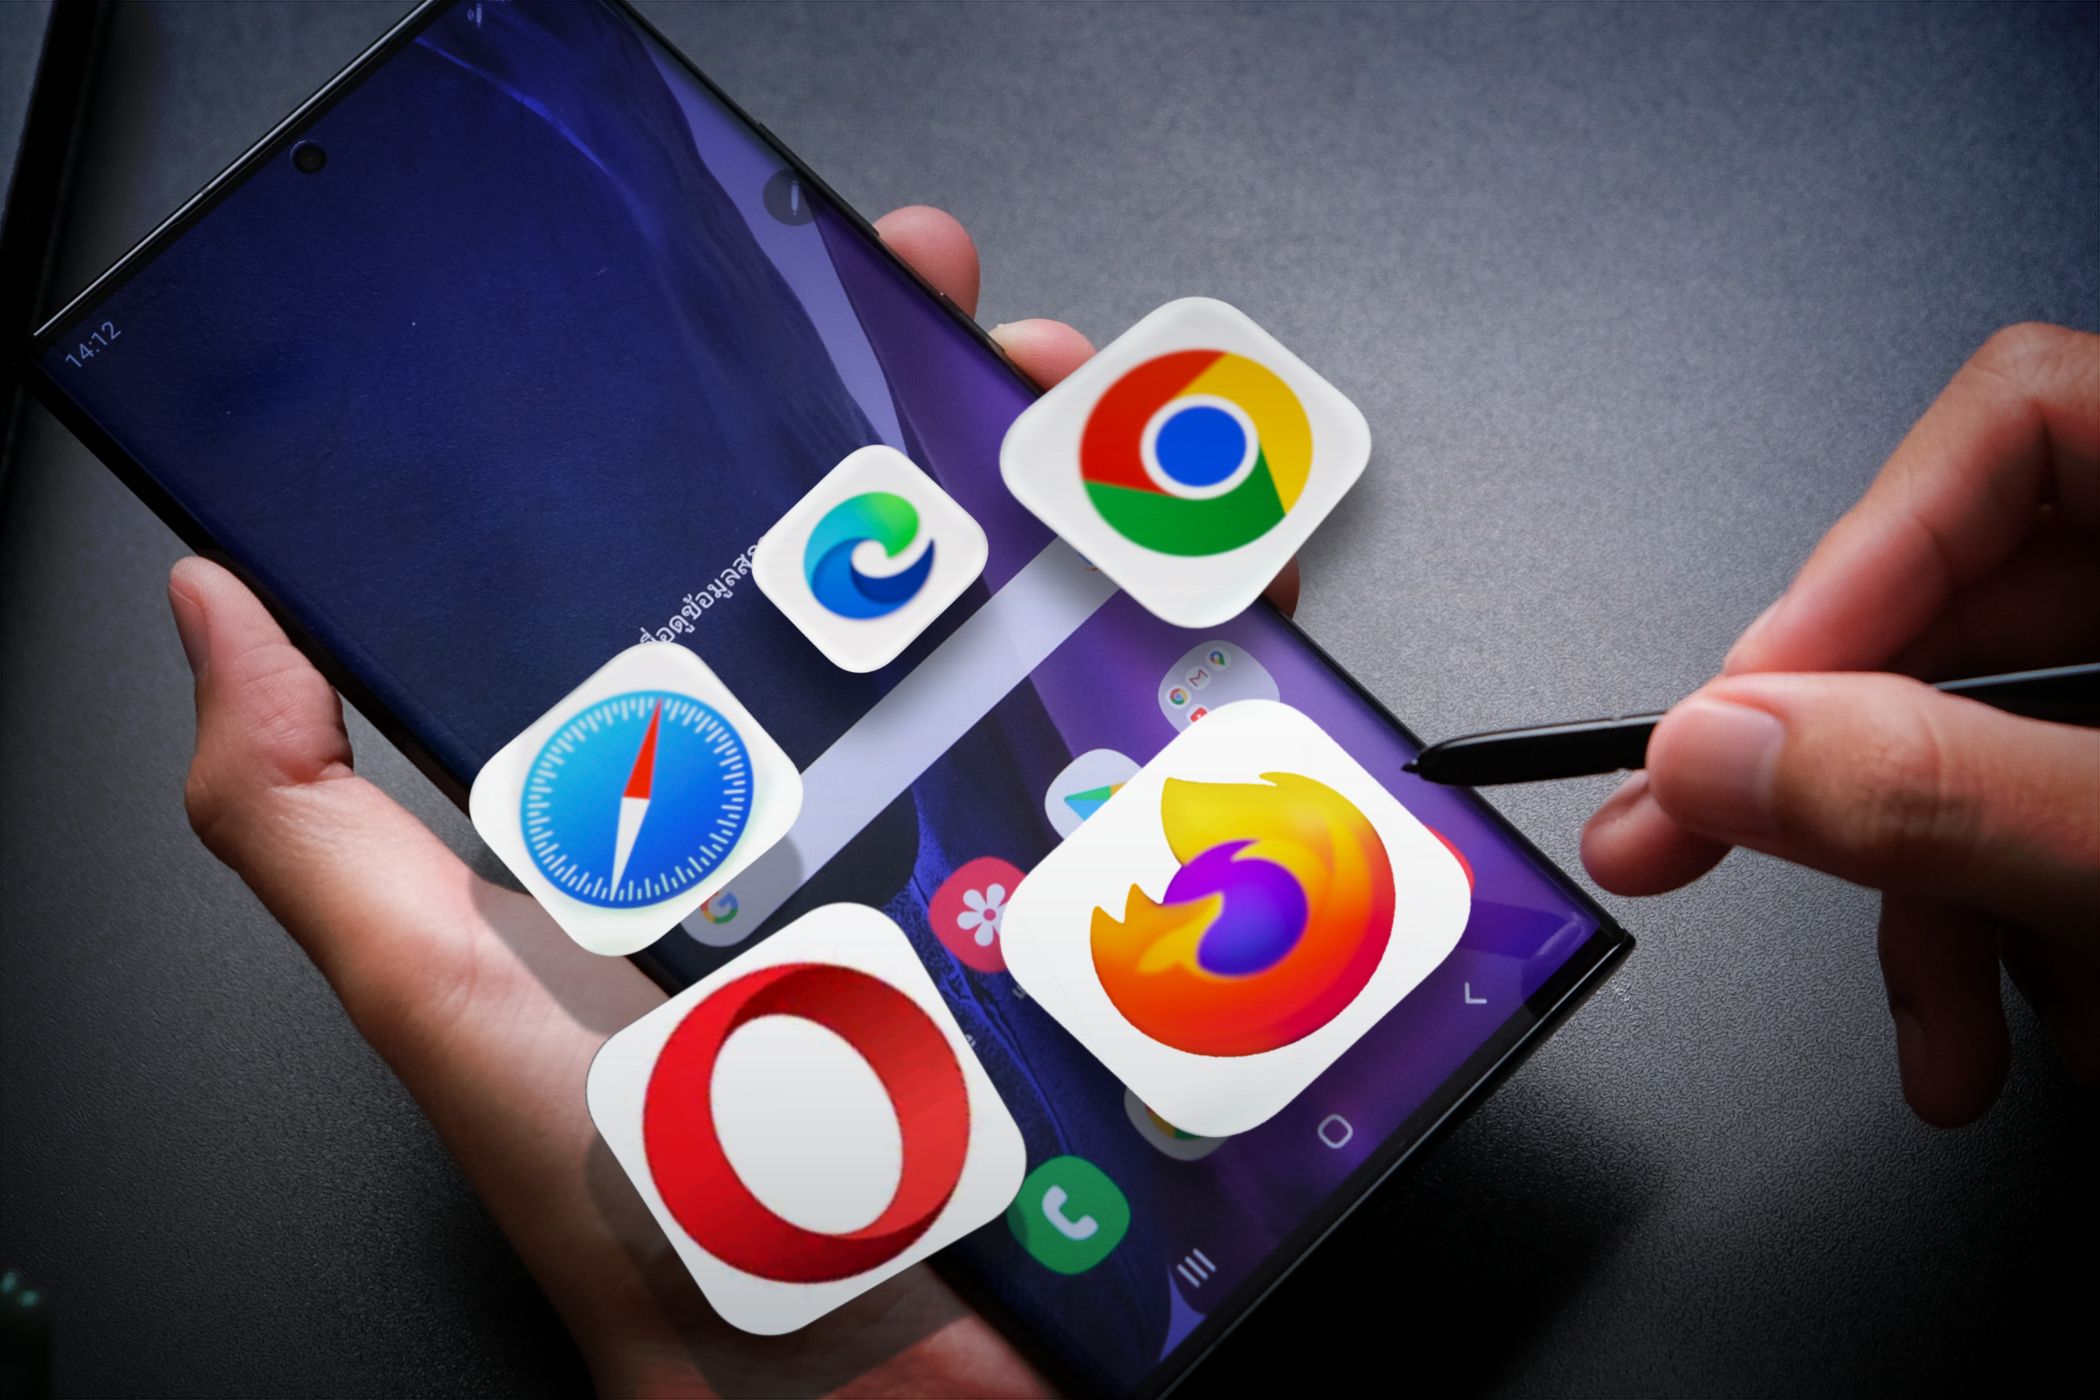 A phone displaying a home screen with different web browser logos floating